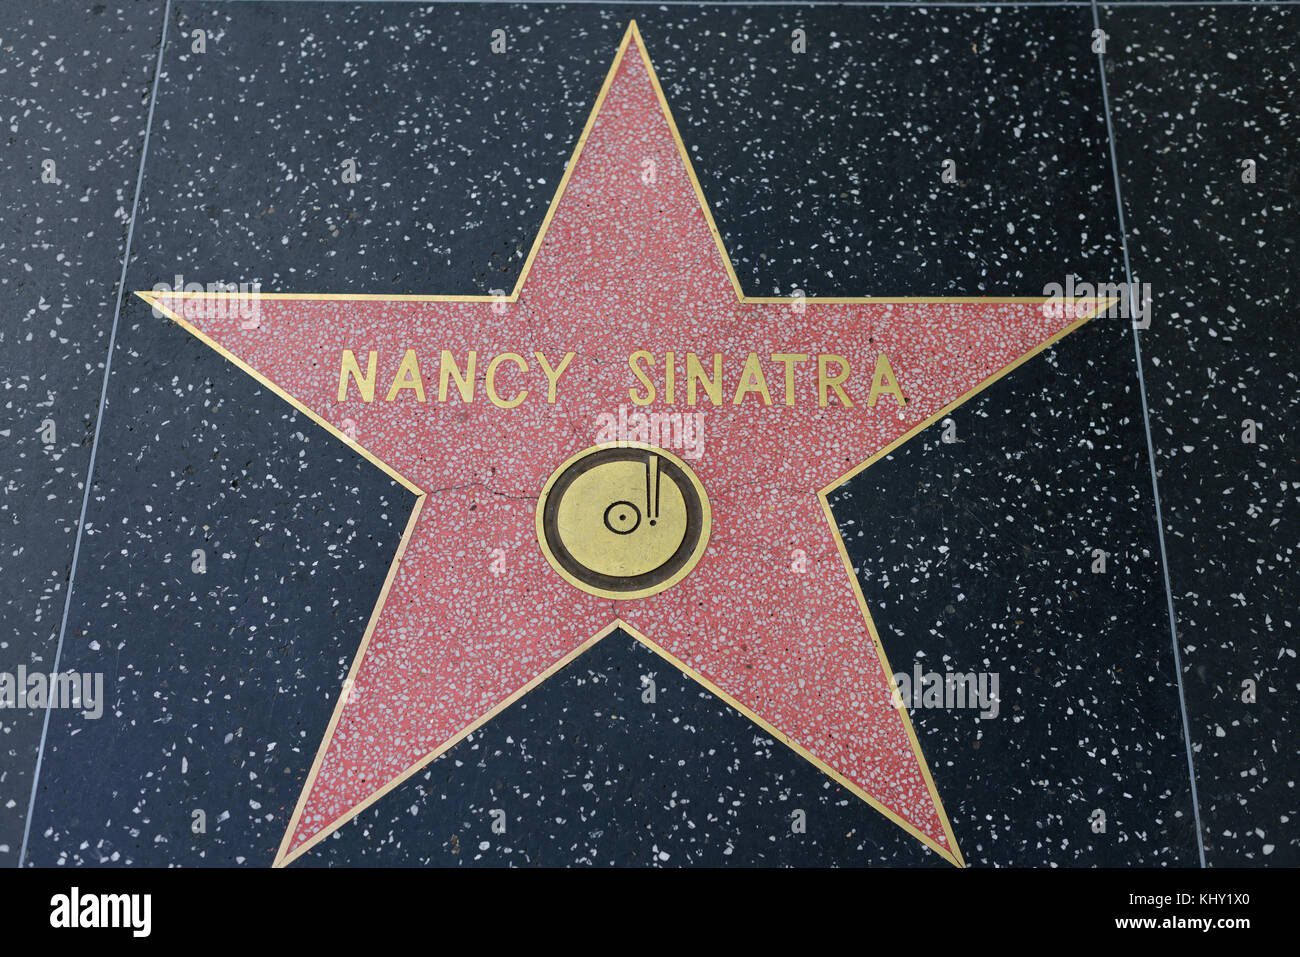 HOLLYWOOD, CA - DECEMBER 06: Nancy Sinatra star on the Hollywood Walk of Fame in Hollywood, California on Dec. 6, 2016. Stock Photo